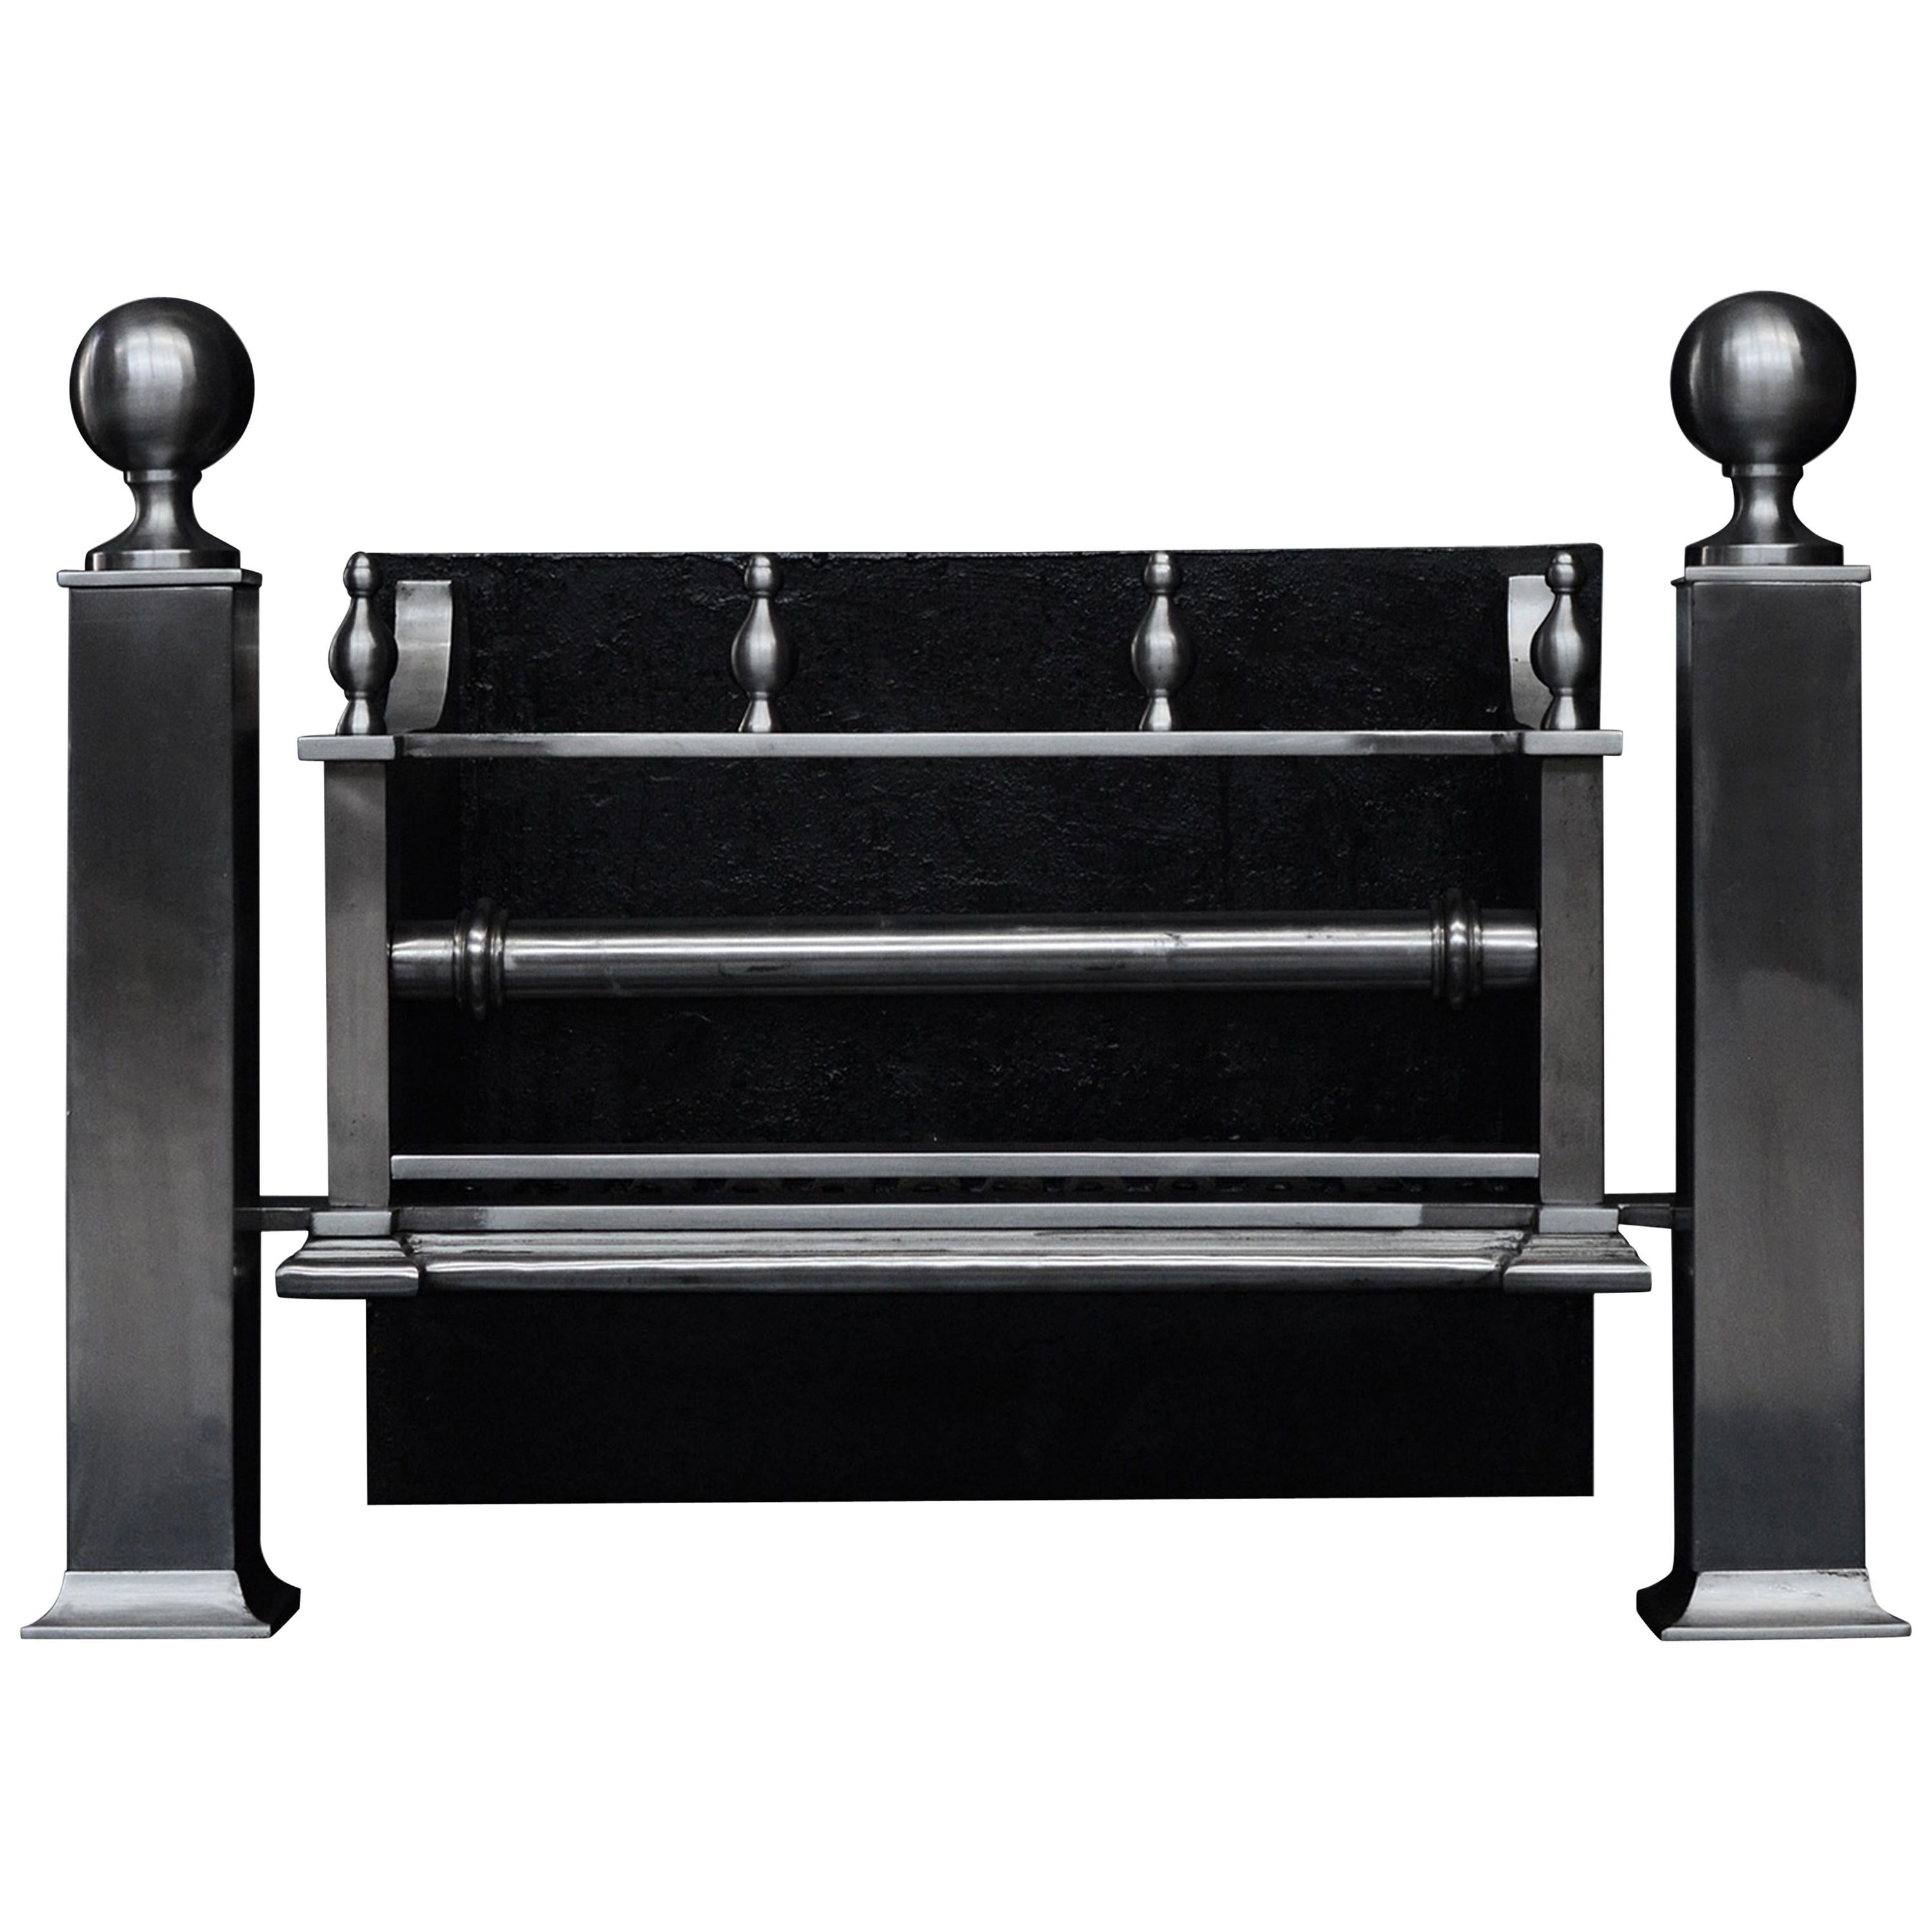 English Steel Firegrate with Ball Finials For Sale